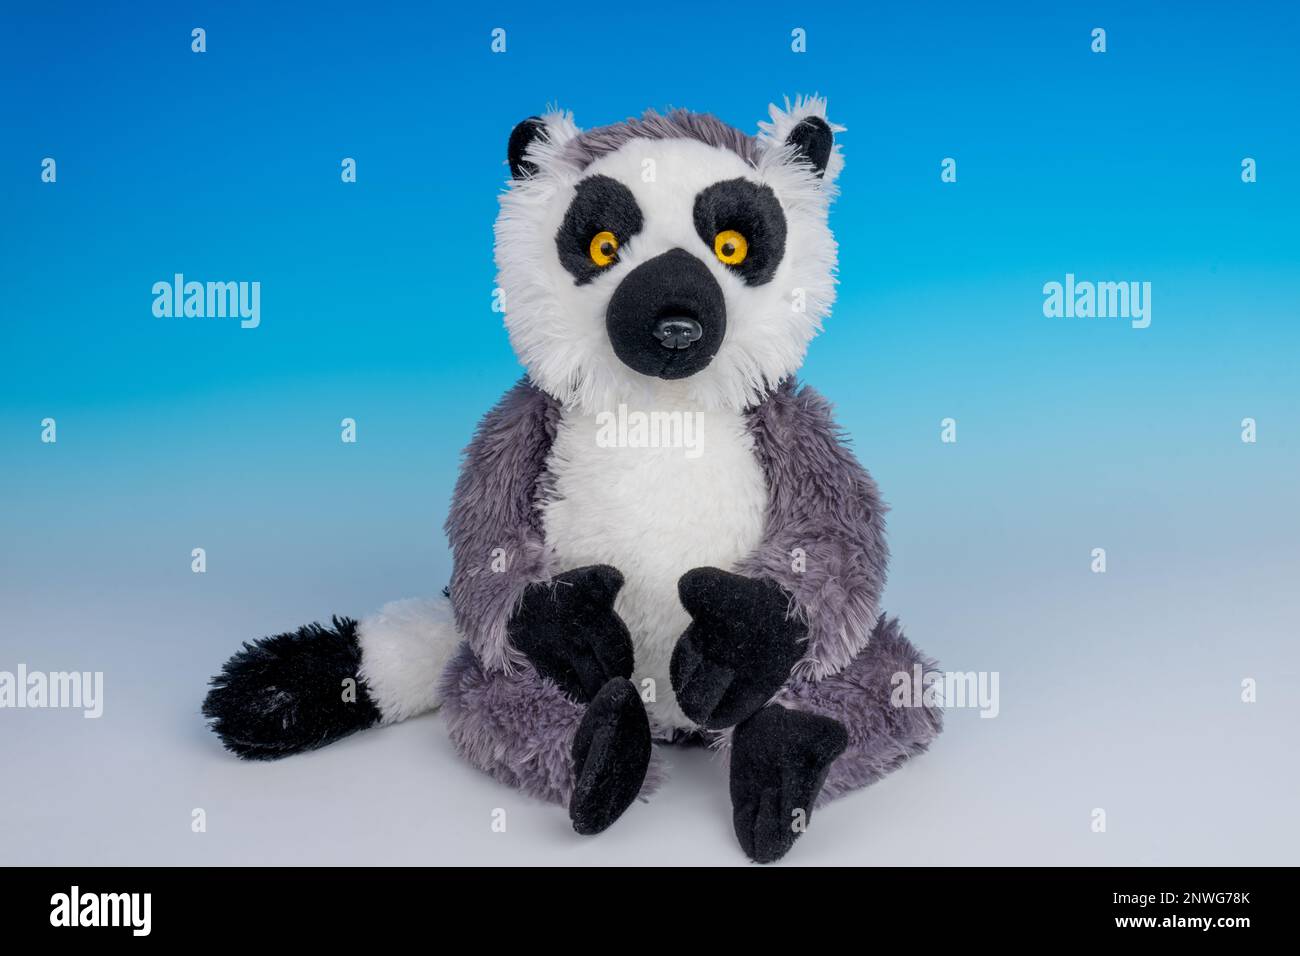 Ring-tailed Lemur stuffed animal on a blue and white seamless background  Stock Photo - Alamy